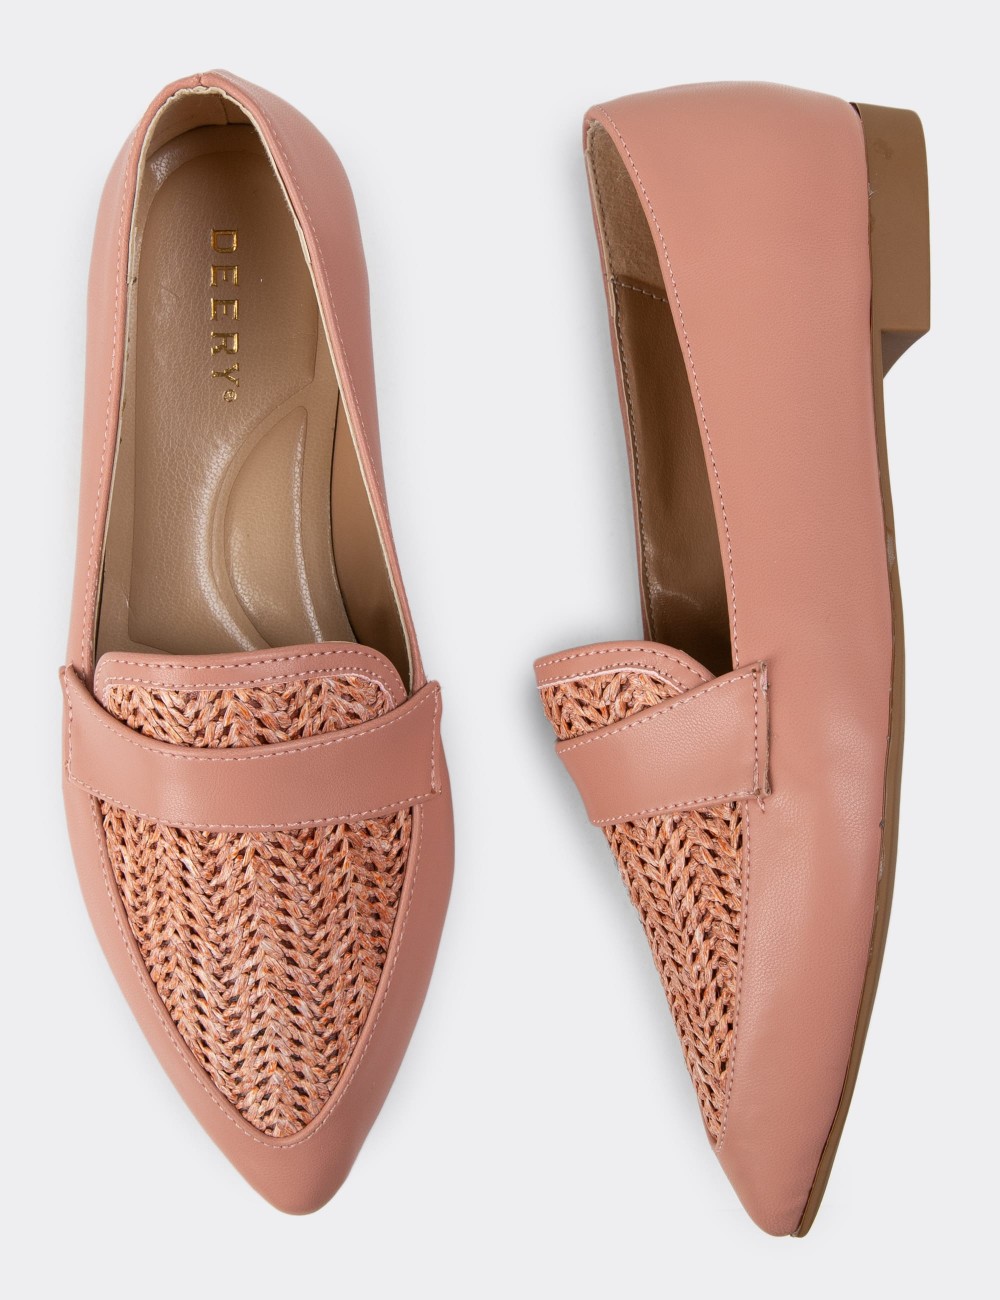 Pink Loafers - 38602ZPDRC01